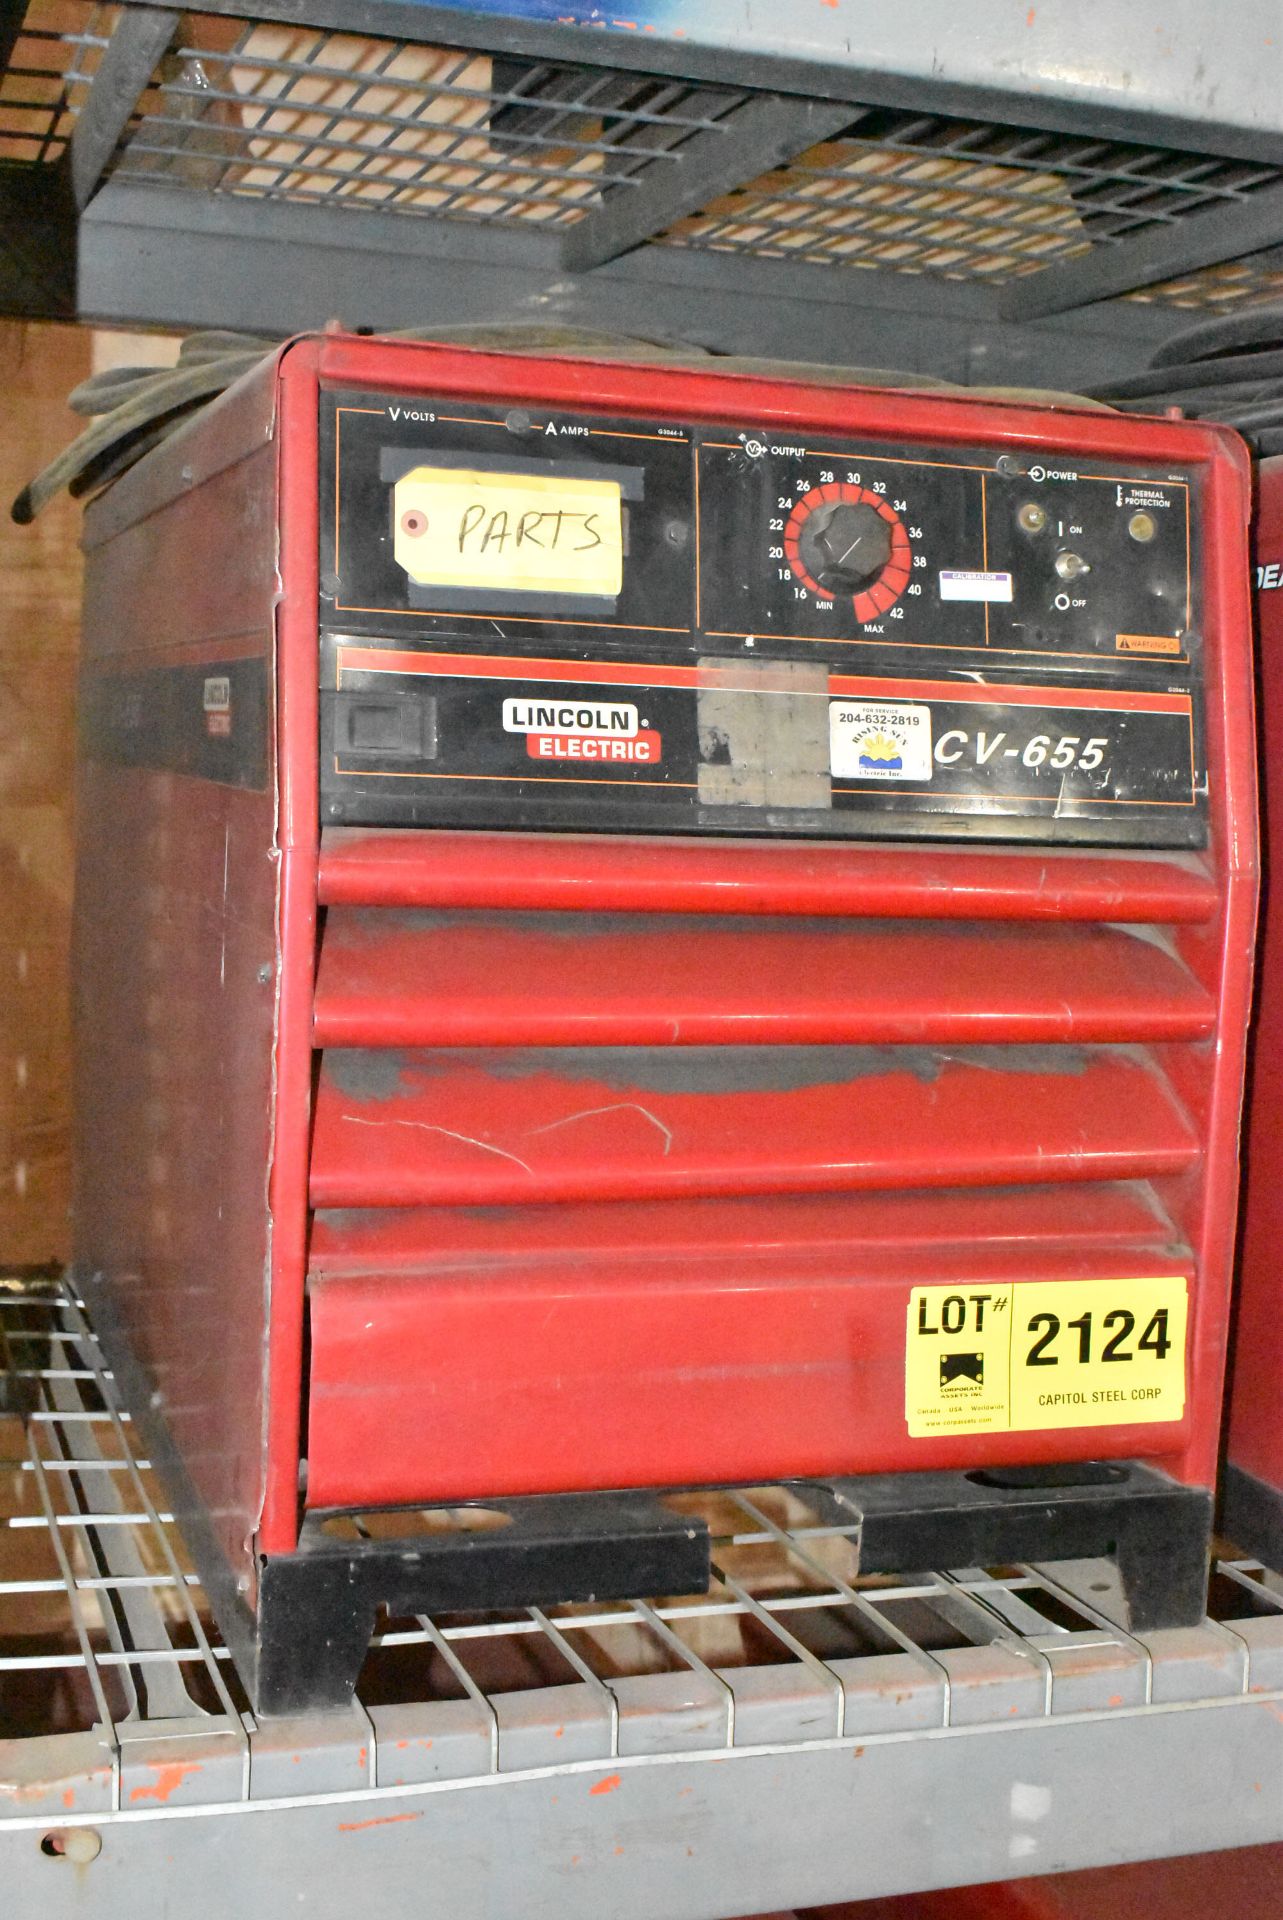 LINCOLN ELECTRIC IDEALARC DC-655 MULTI-PROCESS WELDING POWER SOURCE [RIGGING FEES FOR LOT #2124 - $